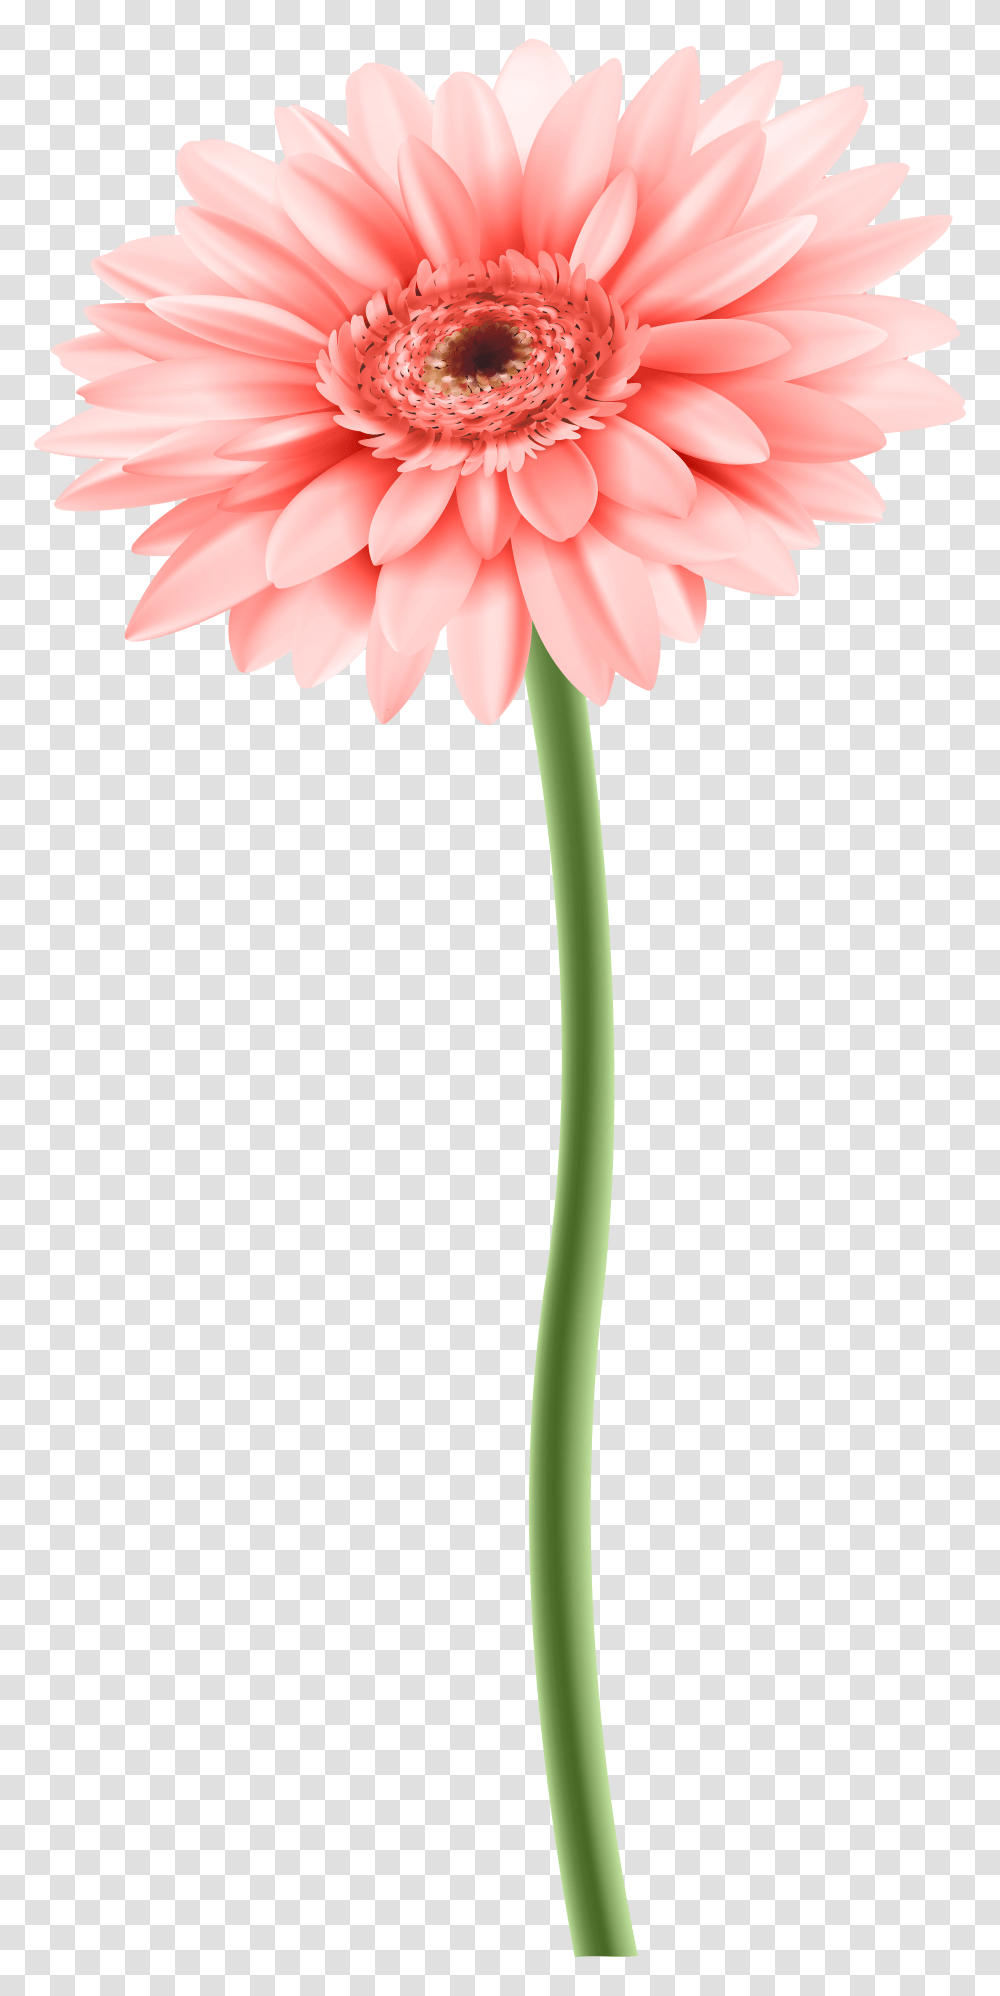 Download Flower With Stem Image Flower With Stem, Plant, Blossom, Amaryllis, Daisy Transparent Png